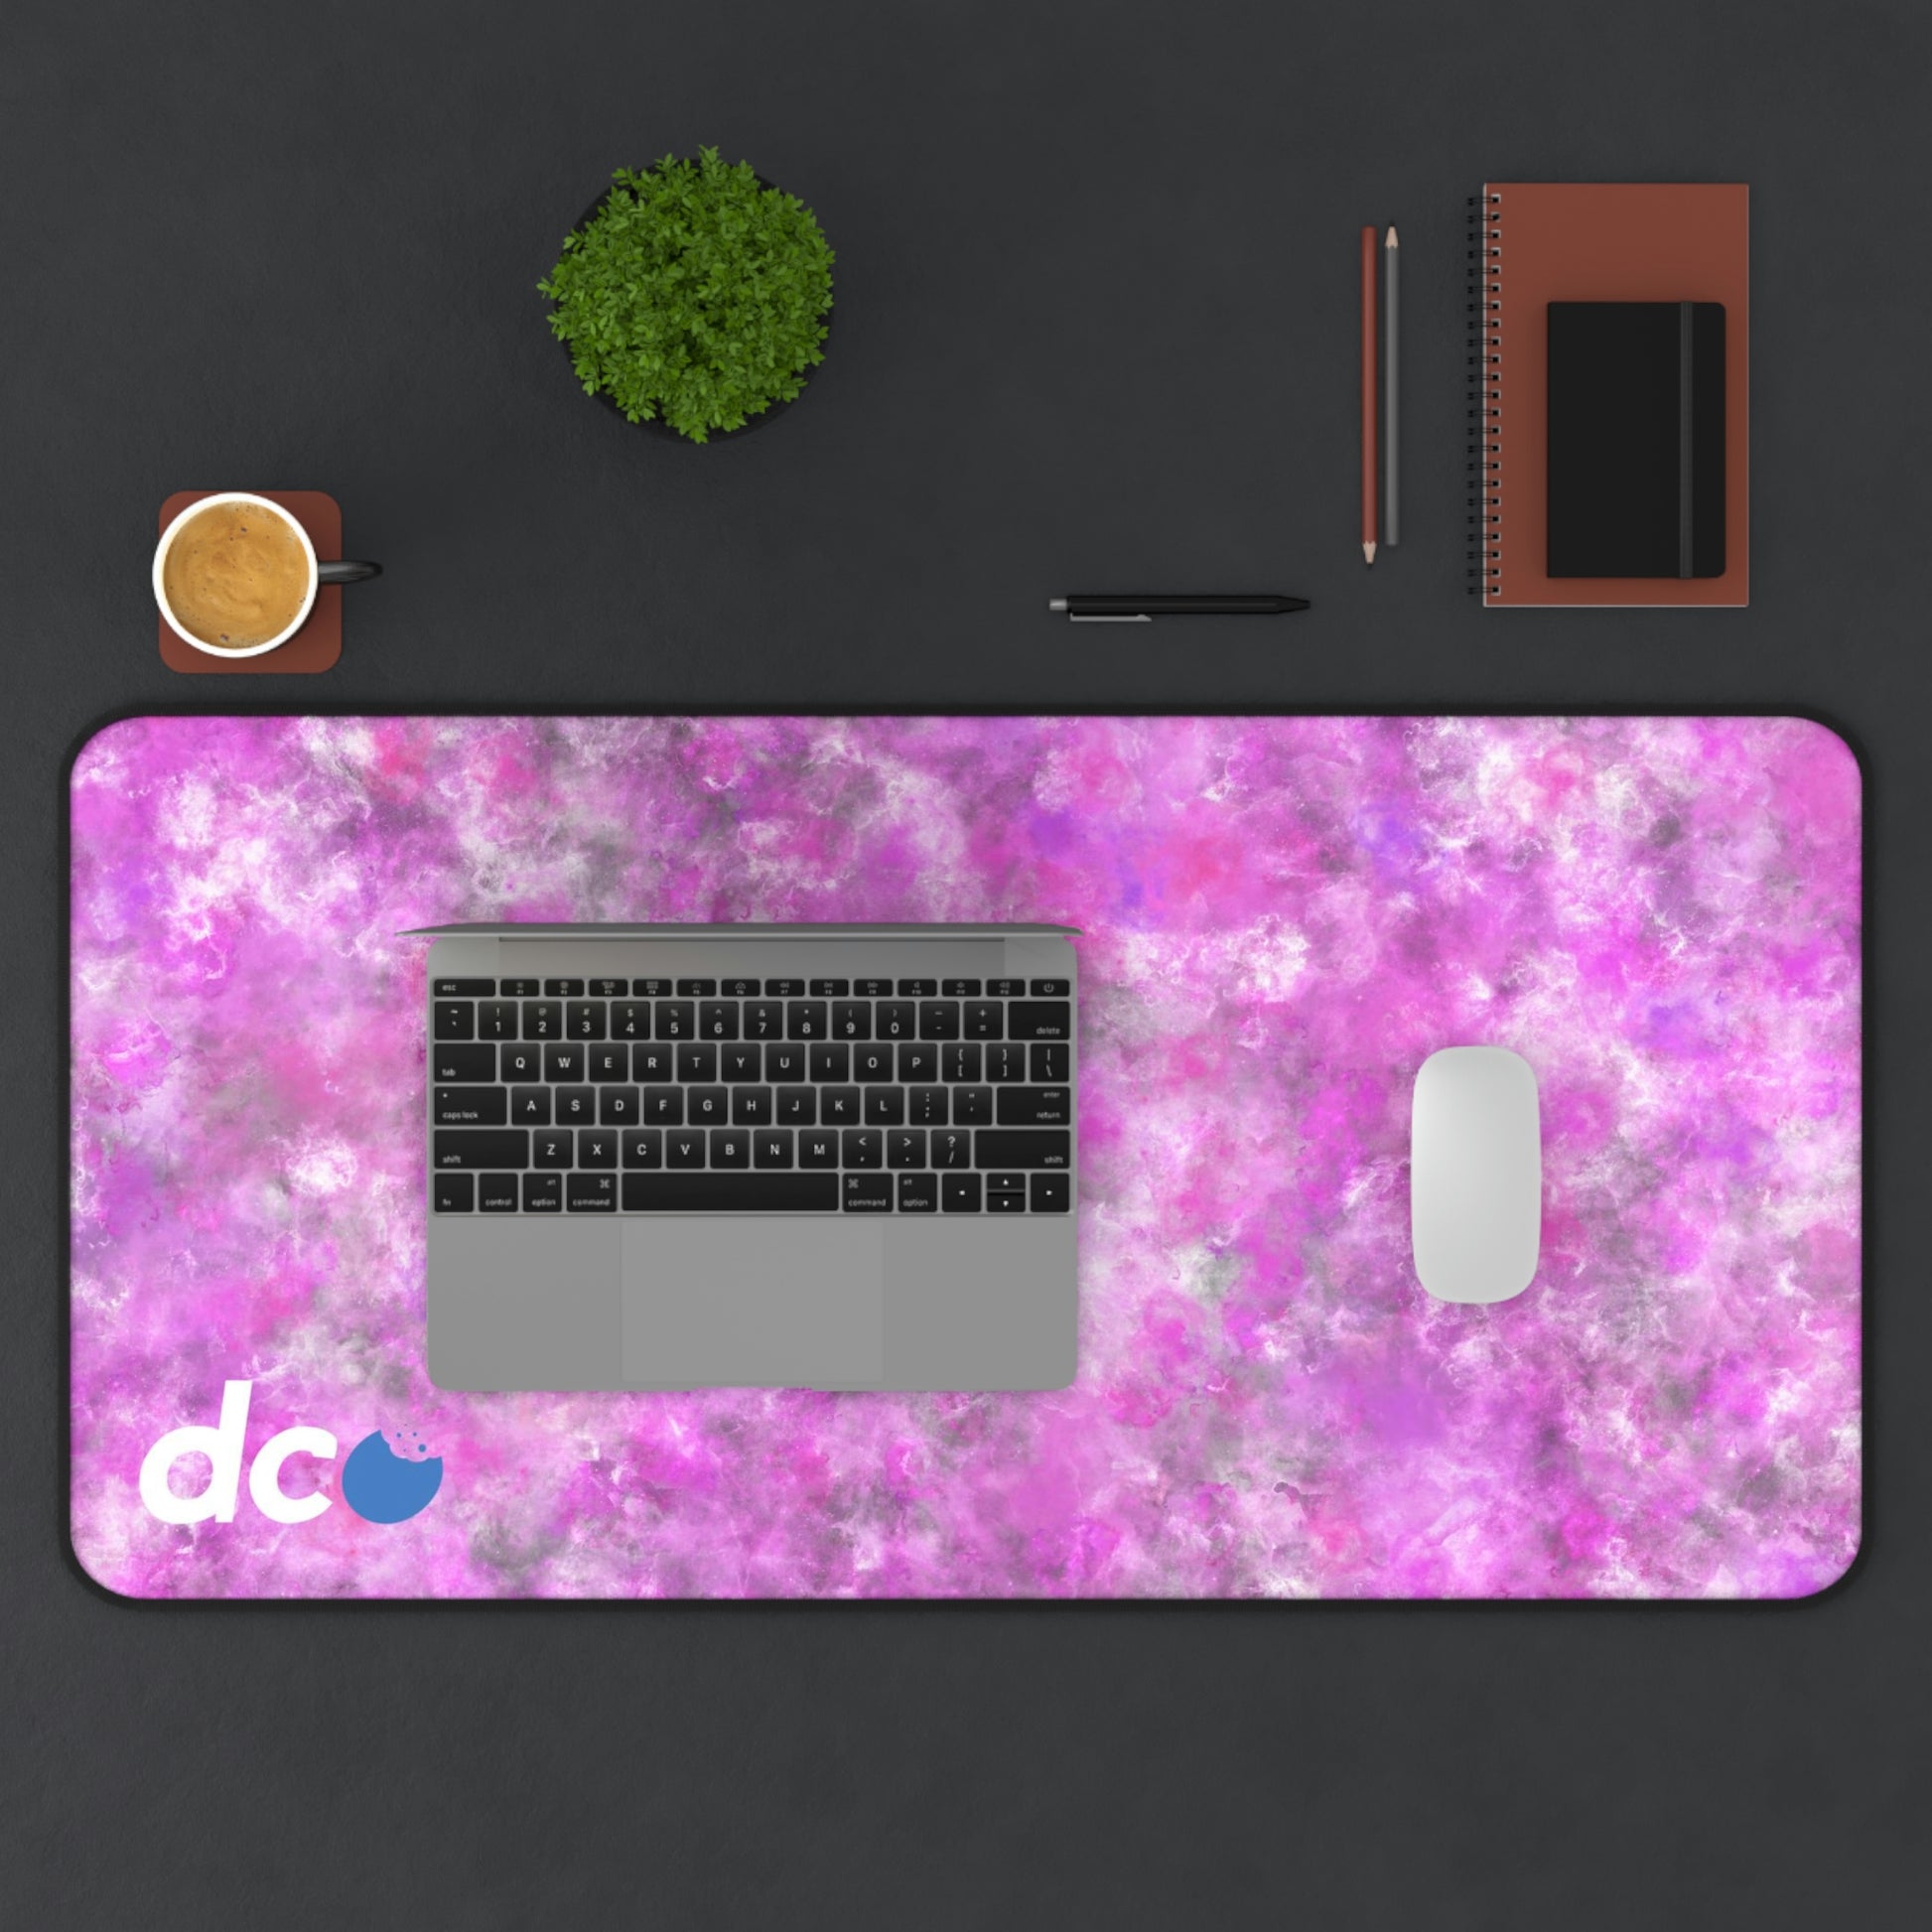 A 31" x 15.5" desk mat with a fluffy mix of pink, white, and gray. A laptop and mouse sit on top of it.